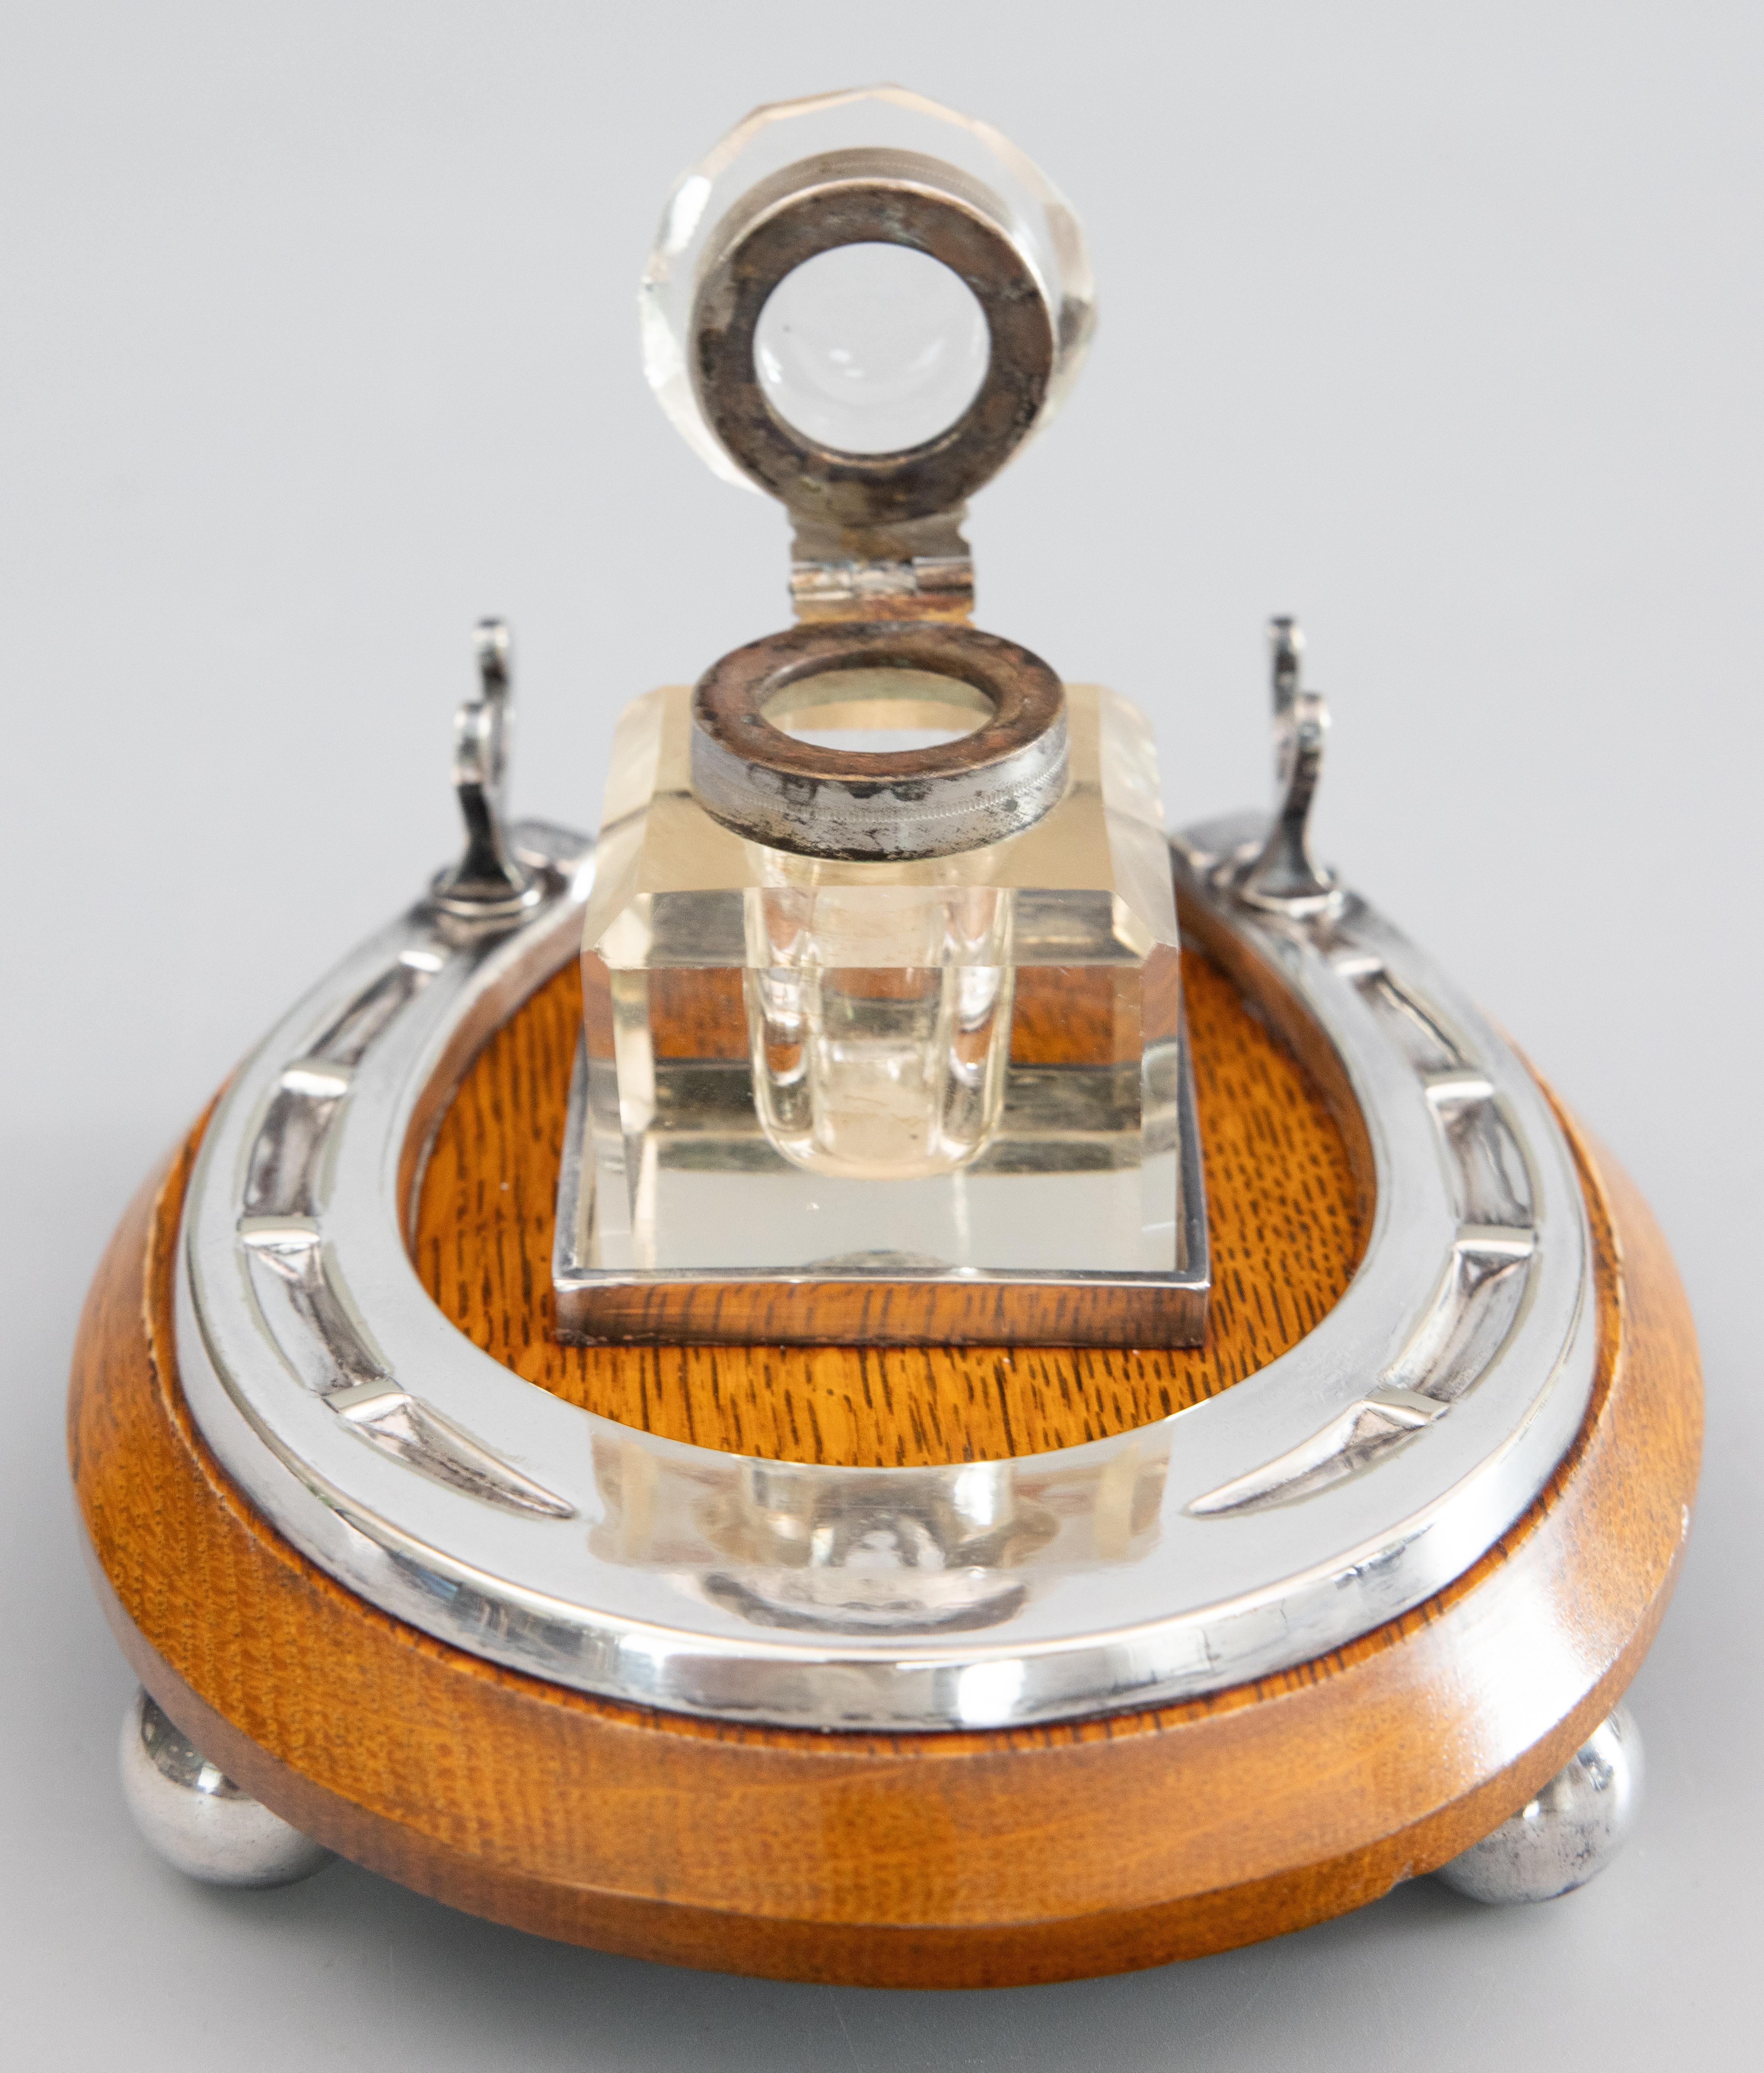 A superb antique English Edwardian silverplate and oak inkwell inkstand with a pen rest, circa 1900. This fine inkstand has the original lovely cut crystal inkwell surrounded by a silverplated horseshoe design on an oak base with charming silver